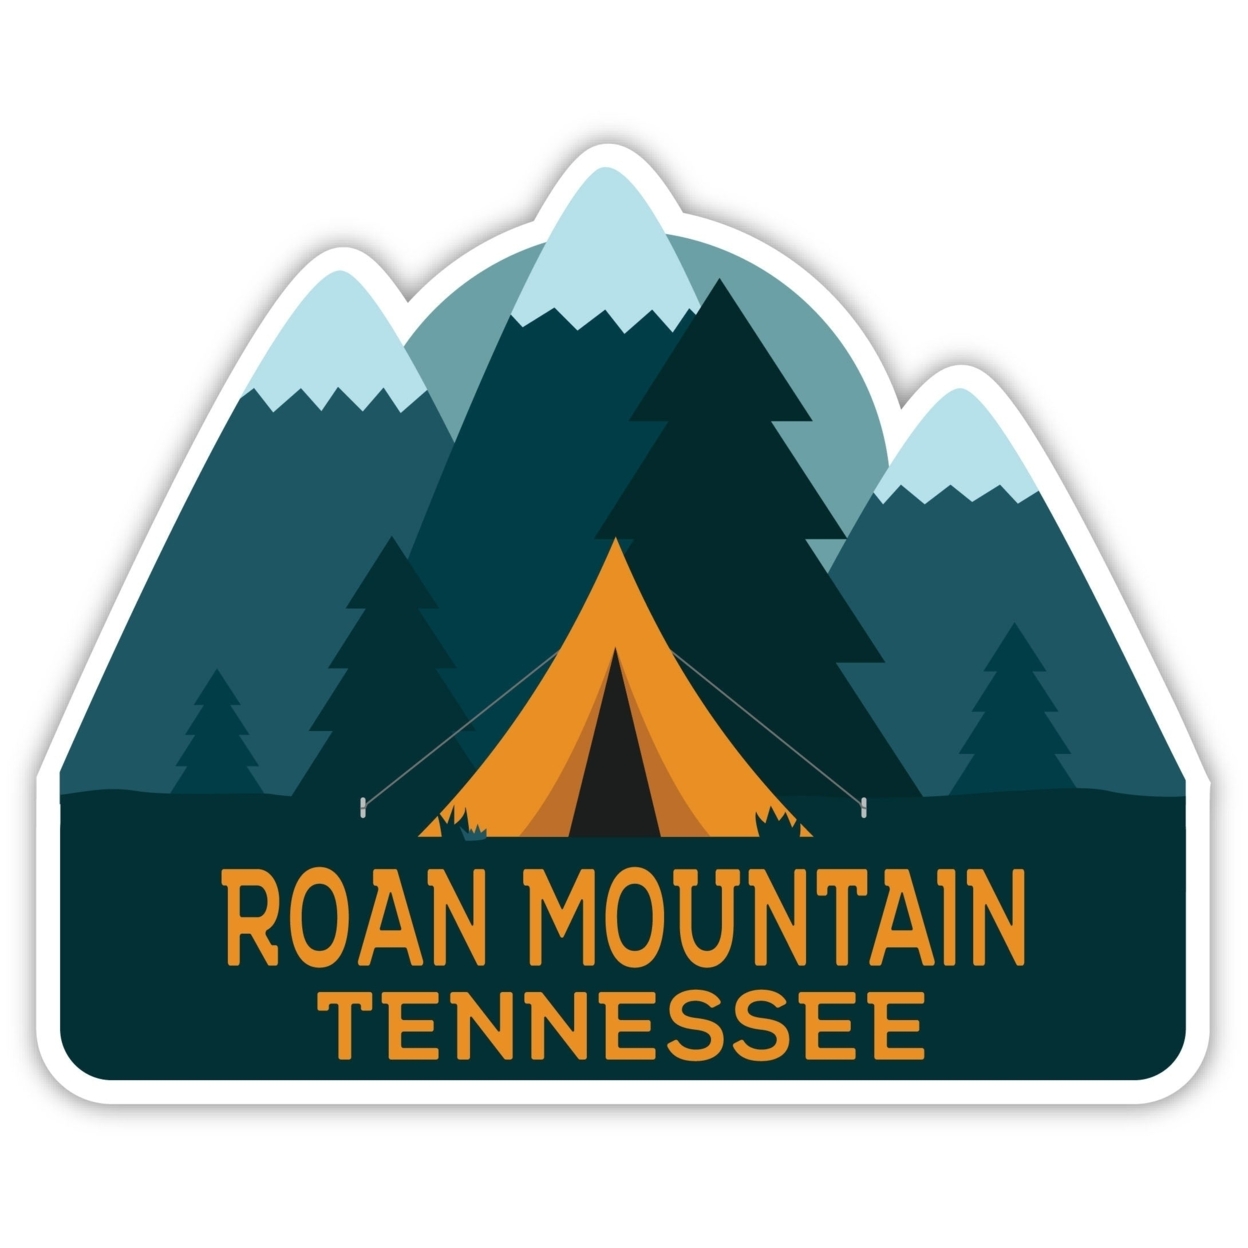 Roan Mountain Tennessee Souvenir Decorative Stickers (Choose Theme And Size) - Single Unit, 2-Inch, Bear